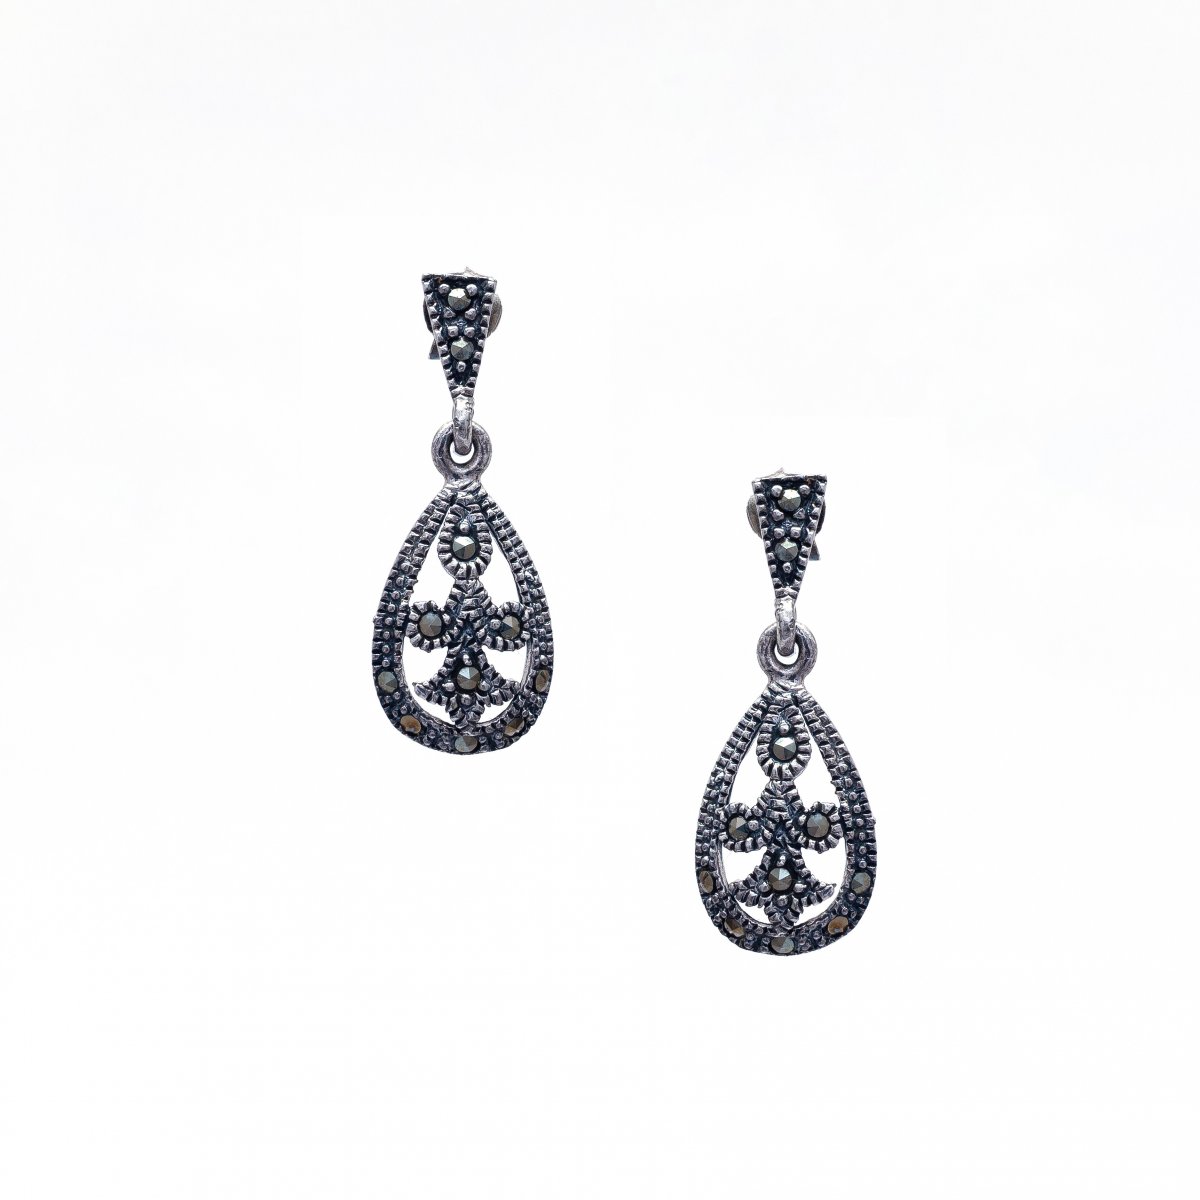 92.5 OXIDISED SILVER FASHION EARRINGS FOR WOMEN AND GIRLS